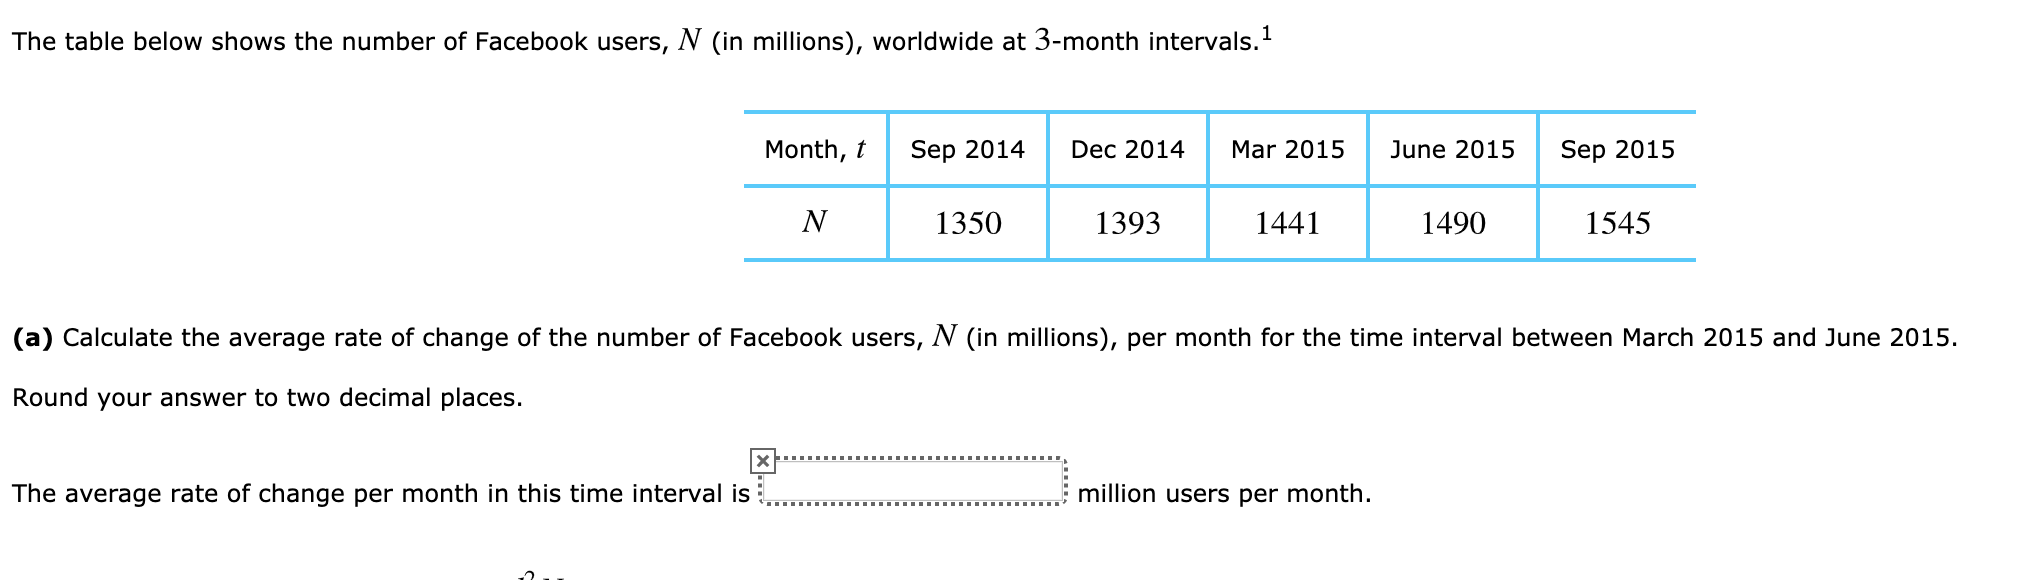 The table below shows the number of Facebook users, N (in millions), worldwide at 3-month intervals.
Dec 2014
Month, t
Sep 2014
Mar 2015
June 2015
Sep 2015
N
1350
1441
1490
1545
1393
(a) Calculate the average rate of change of the number of Facebook users, N (in millions), per month for the time interval between March 2015 and June 2015
Round your answer to two decimal places.
X
The average rate of change per month in this time interval is
million users per month.
